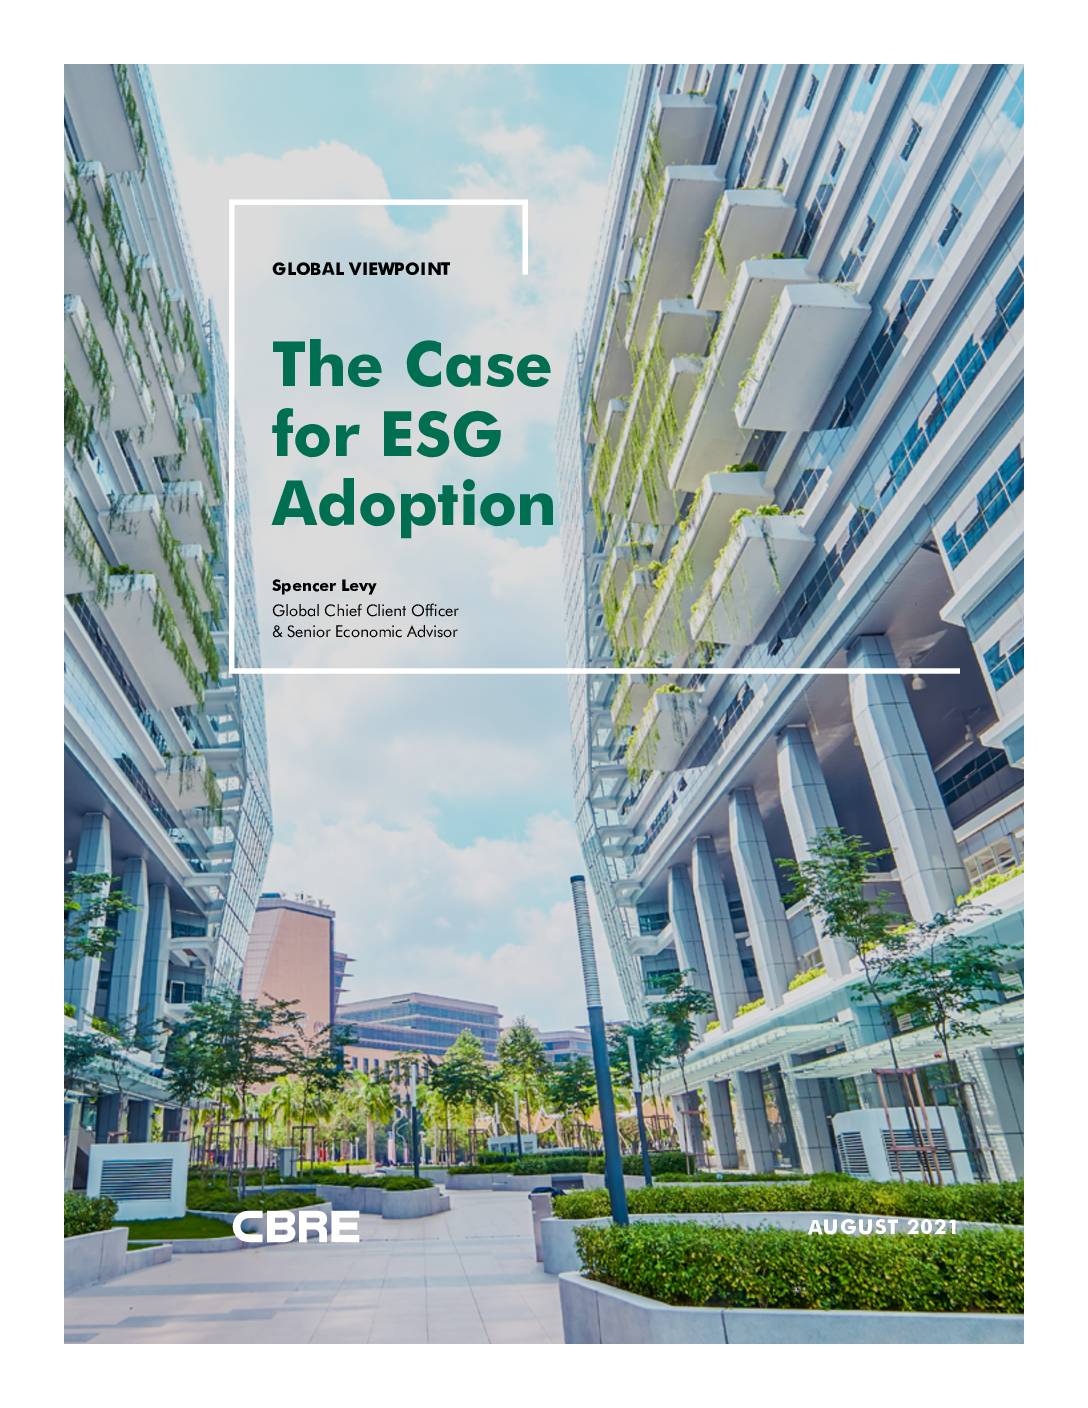 Global Viewpoint: The Case for ESG Adoption